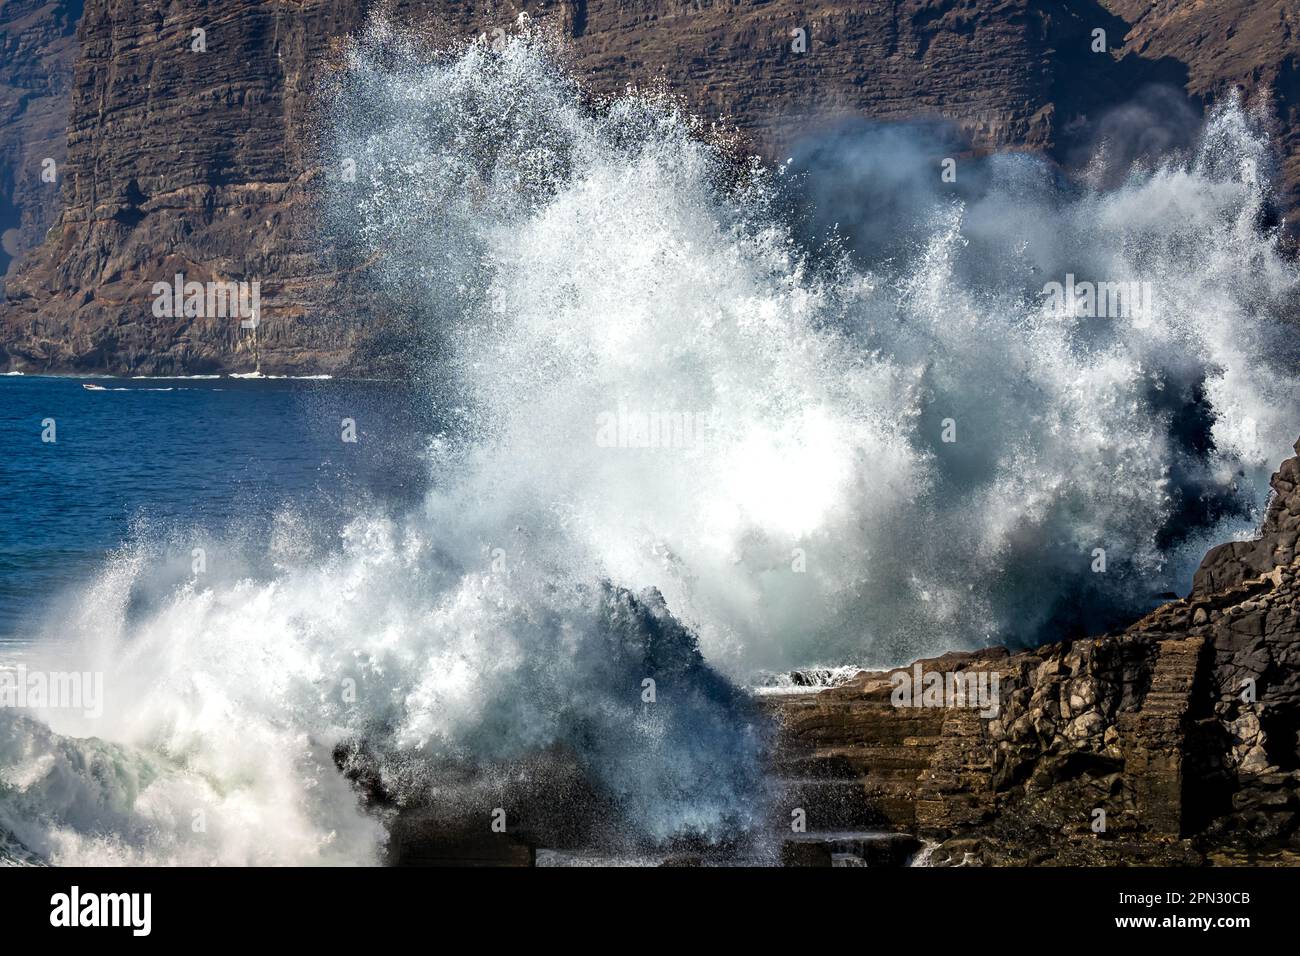 The mighty ocean sends a massive wave crashing against the rocky shore, creating a spectacular display of natural power at Acantilados de los Gigantes Stock Photo